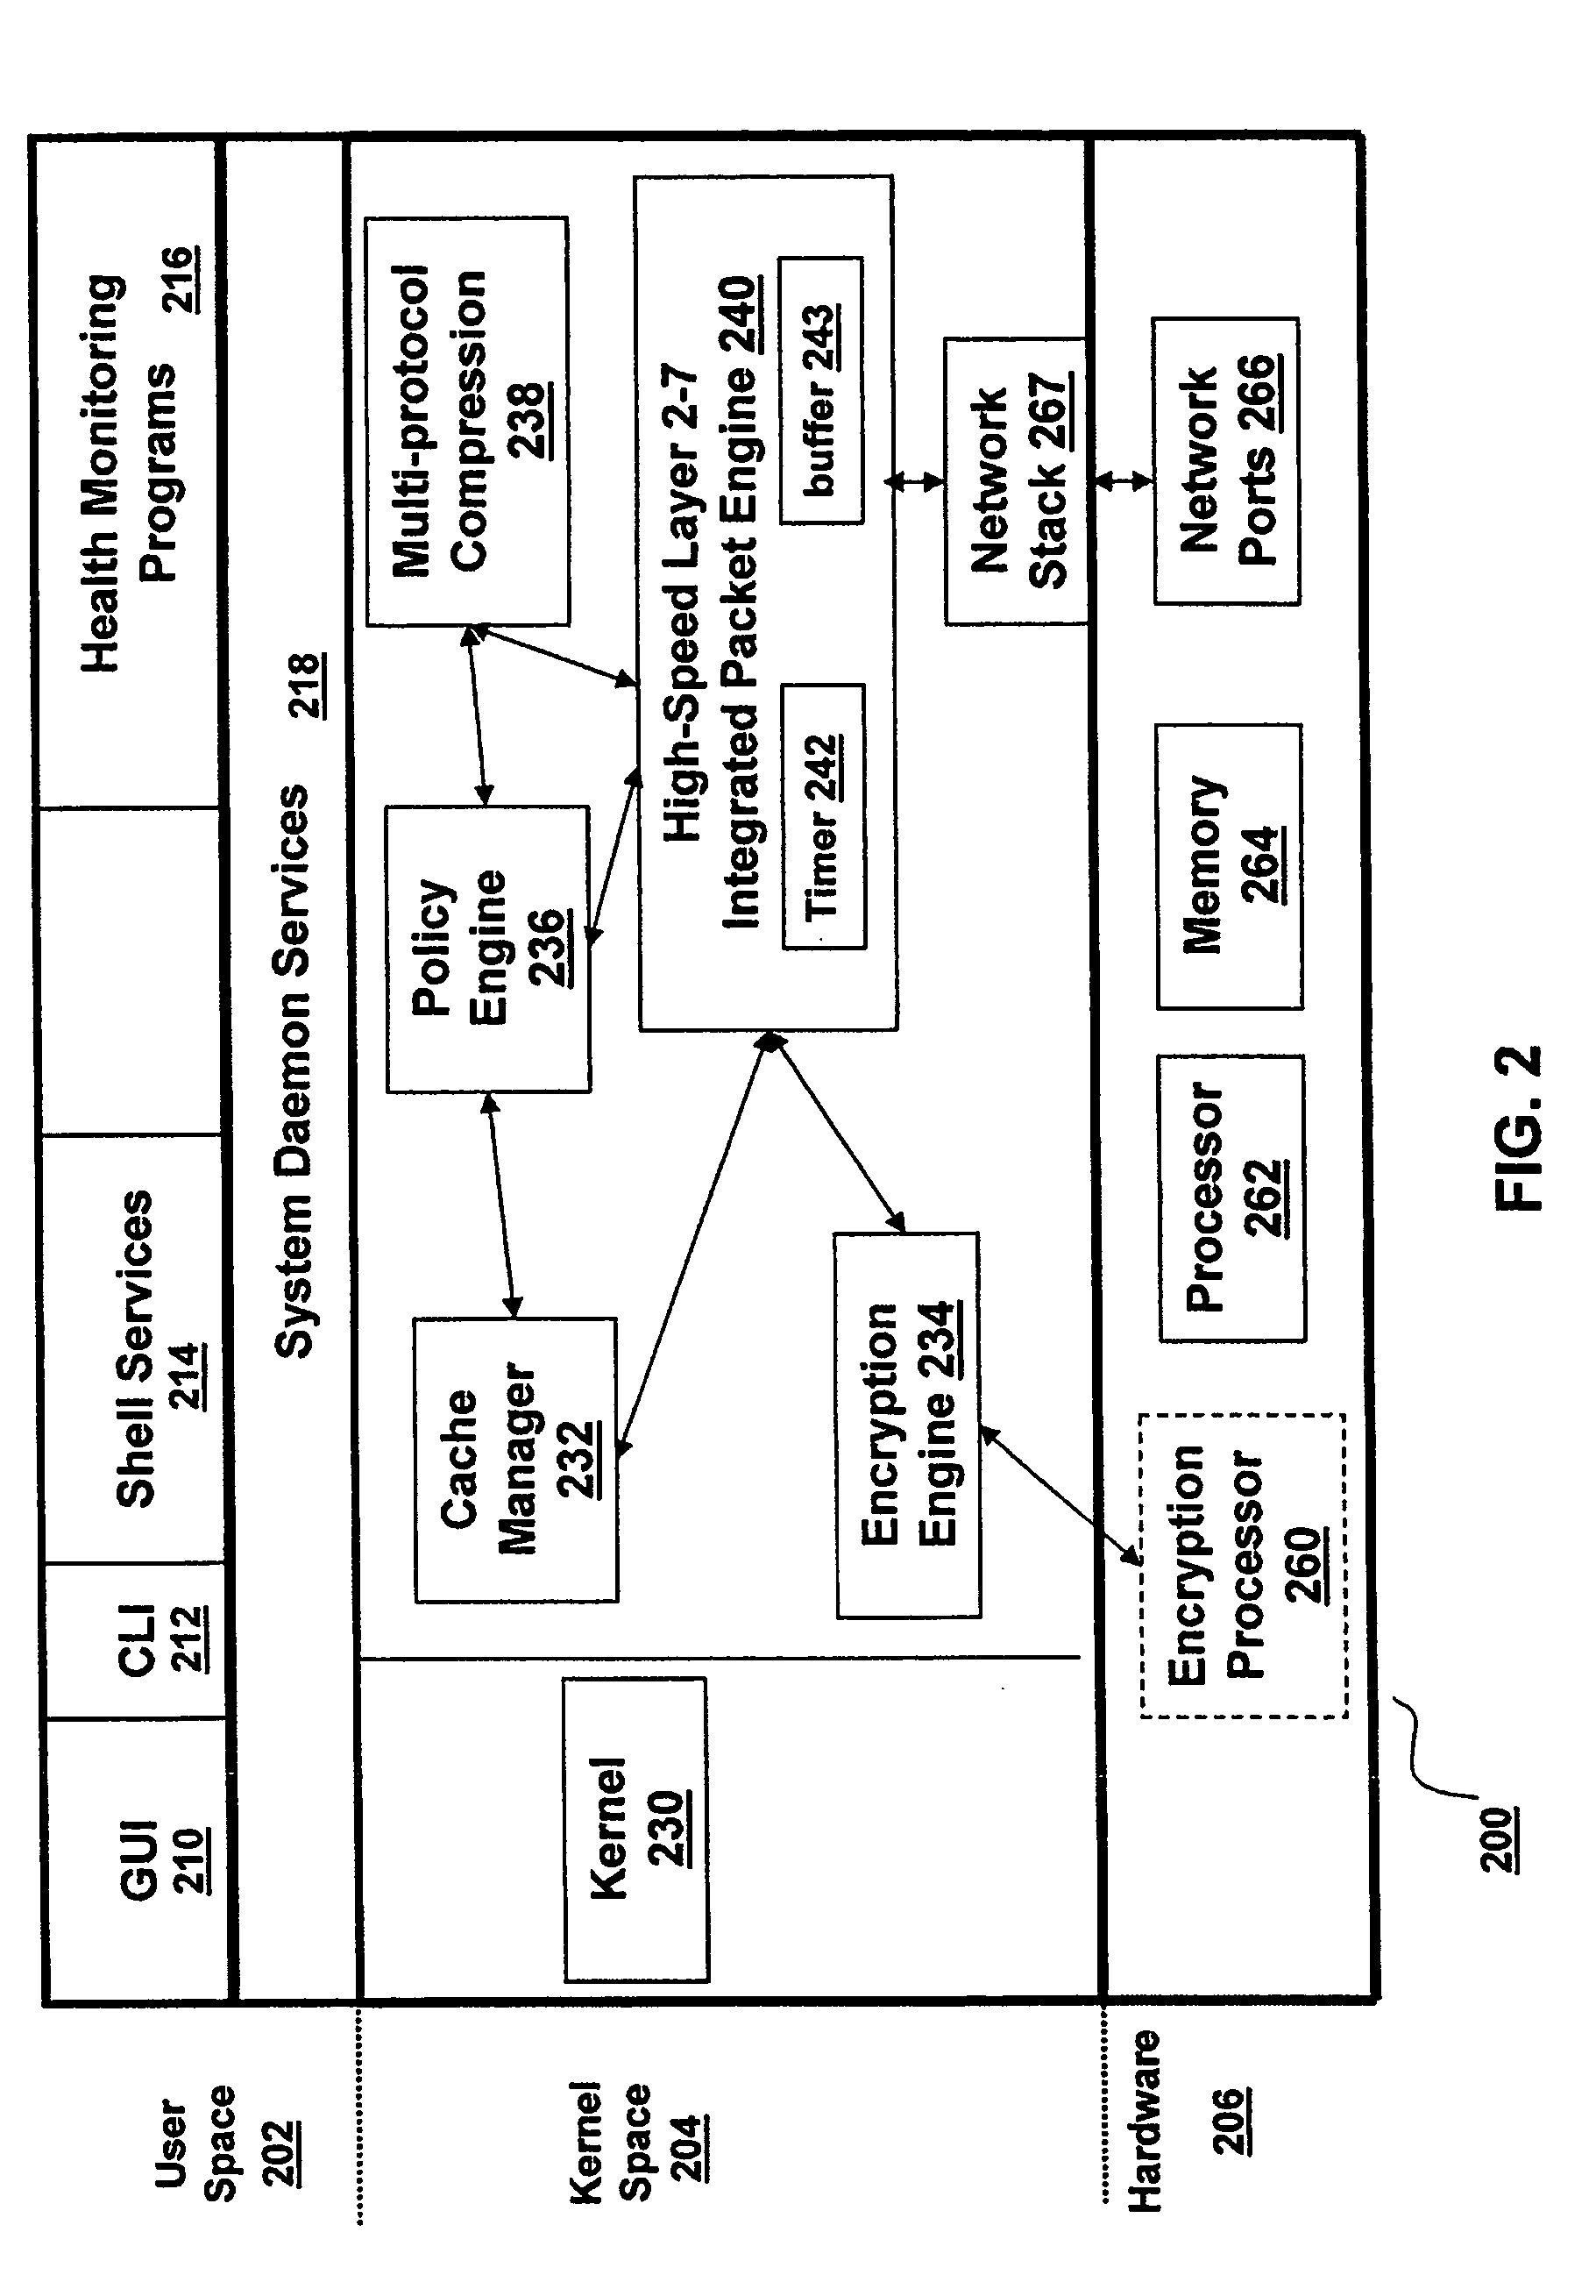 Method and device for performing caching of dynamically generated objects in a data communication network